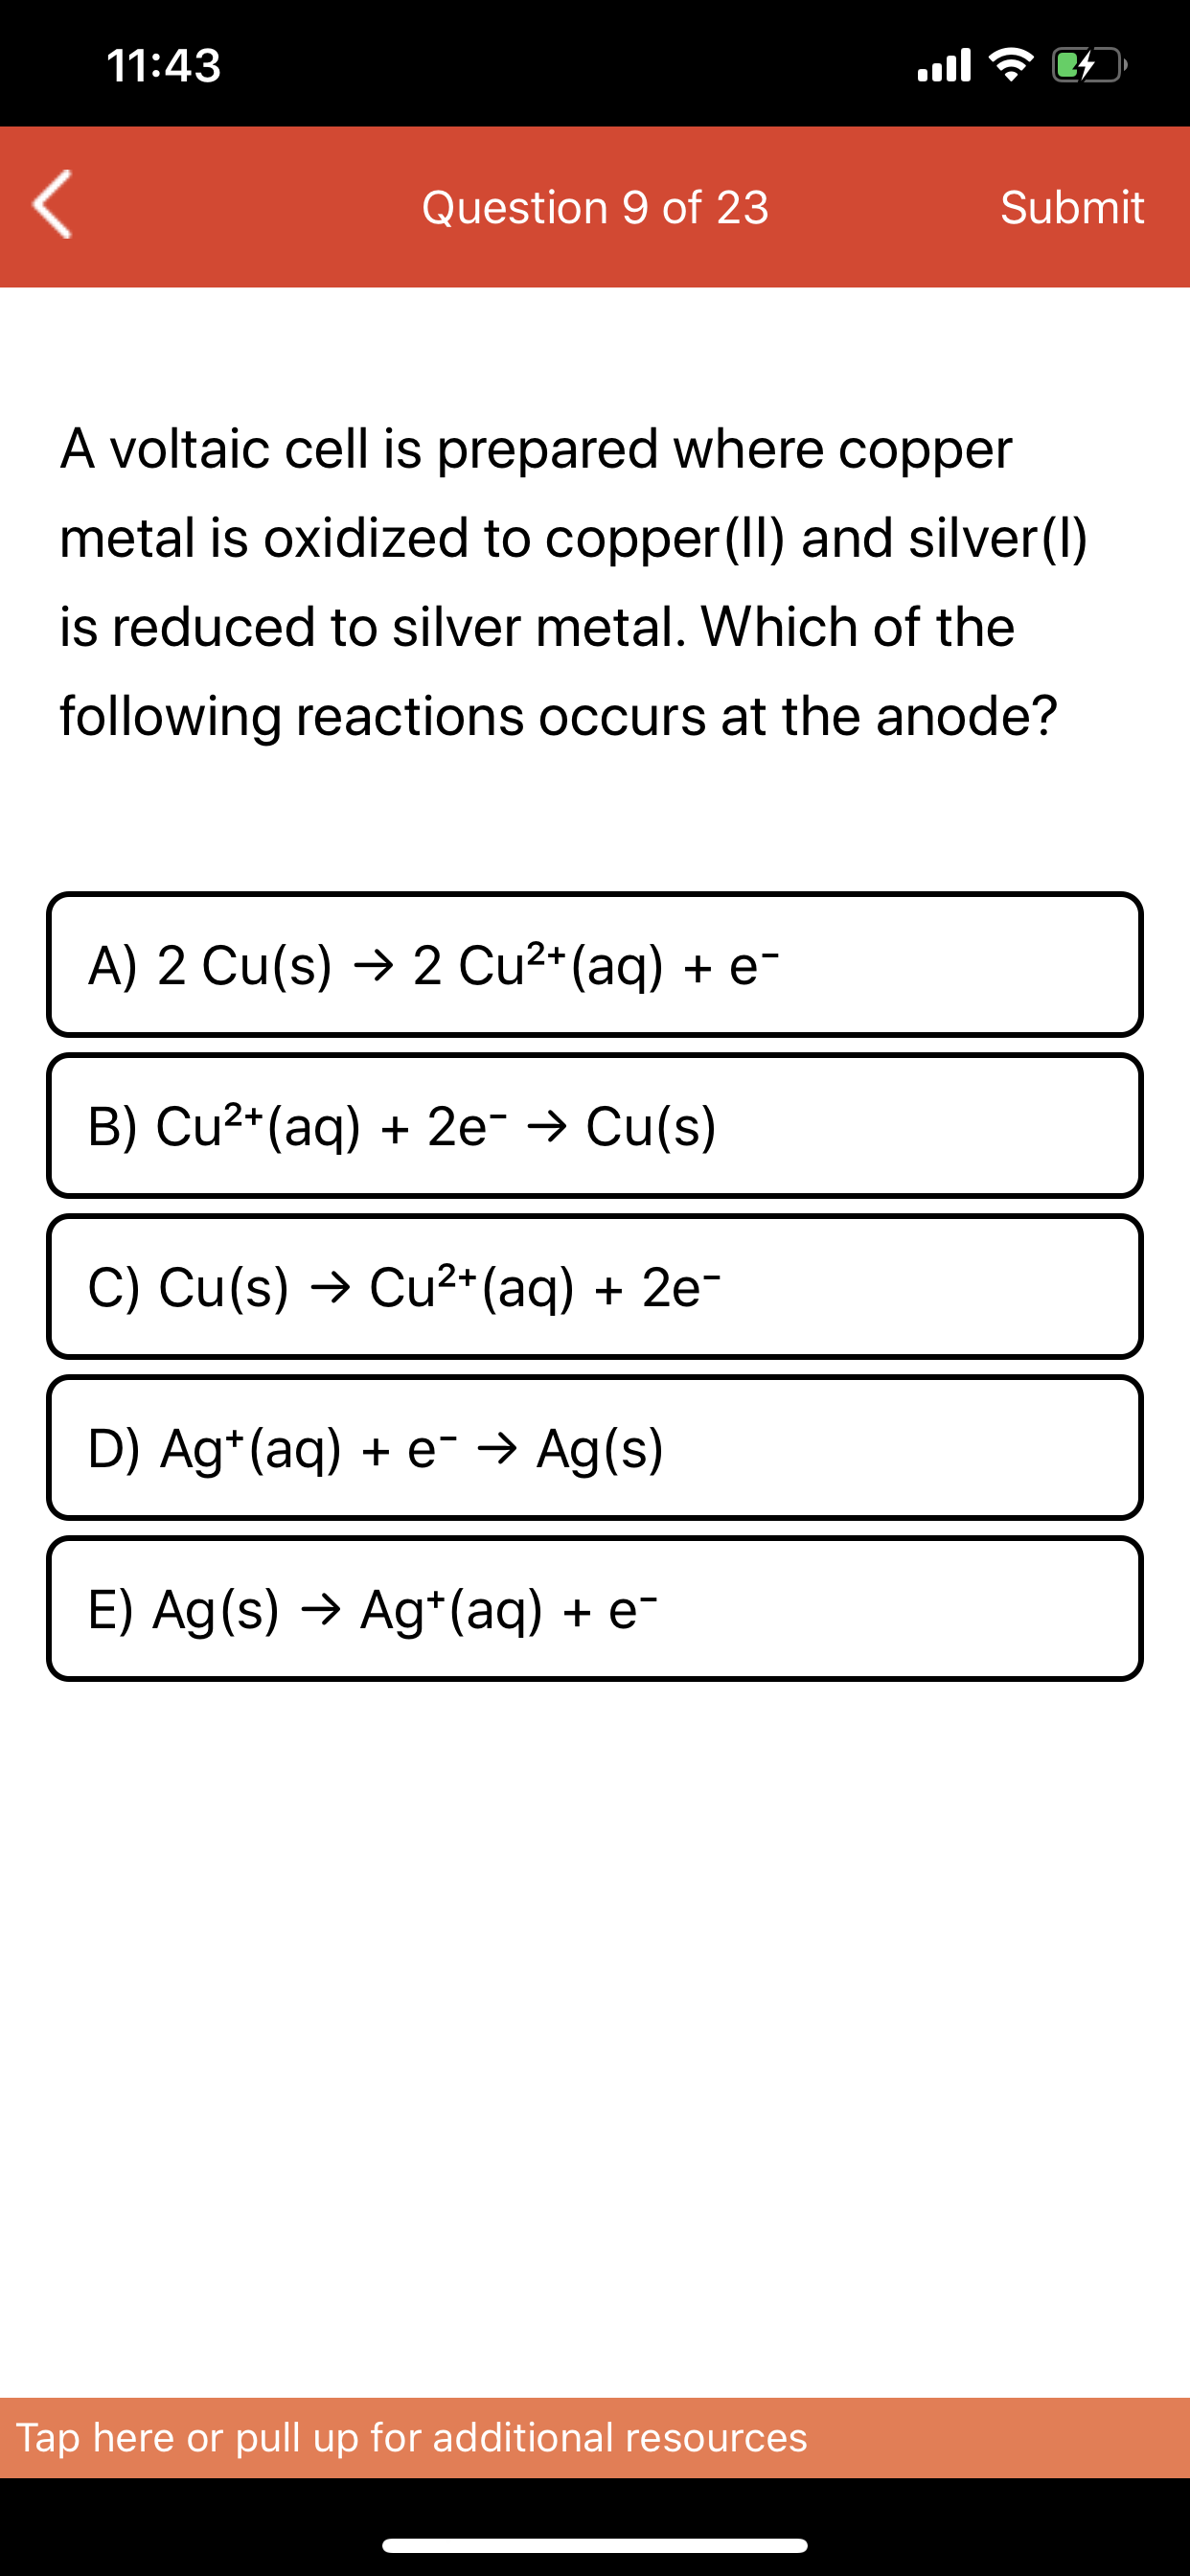 A voltaic cell is prepared where copper
metal is oxidized to copper(II) and silver(I)
is reduced to silver metal. Which of the
following reactions occurs at the anode?
